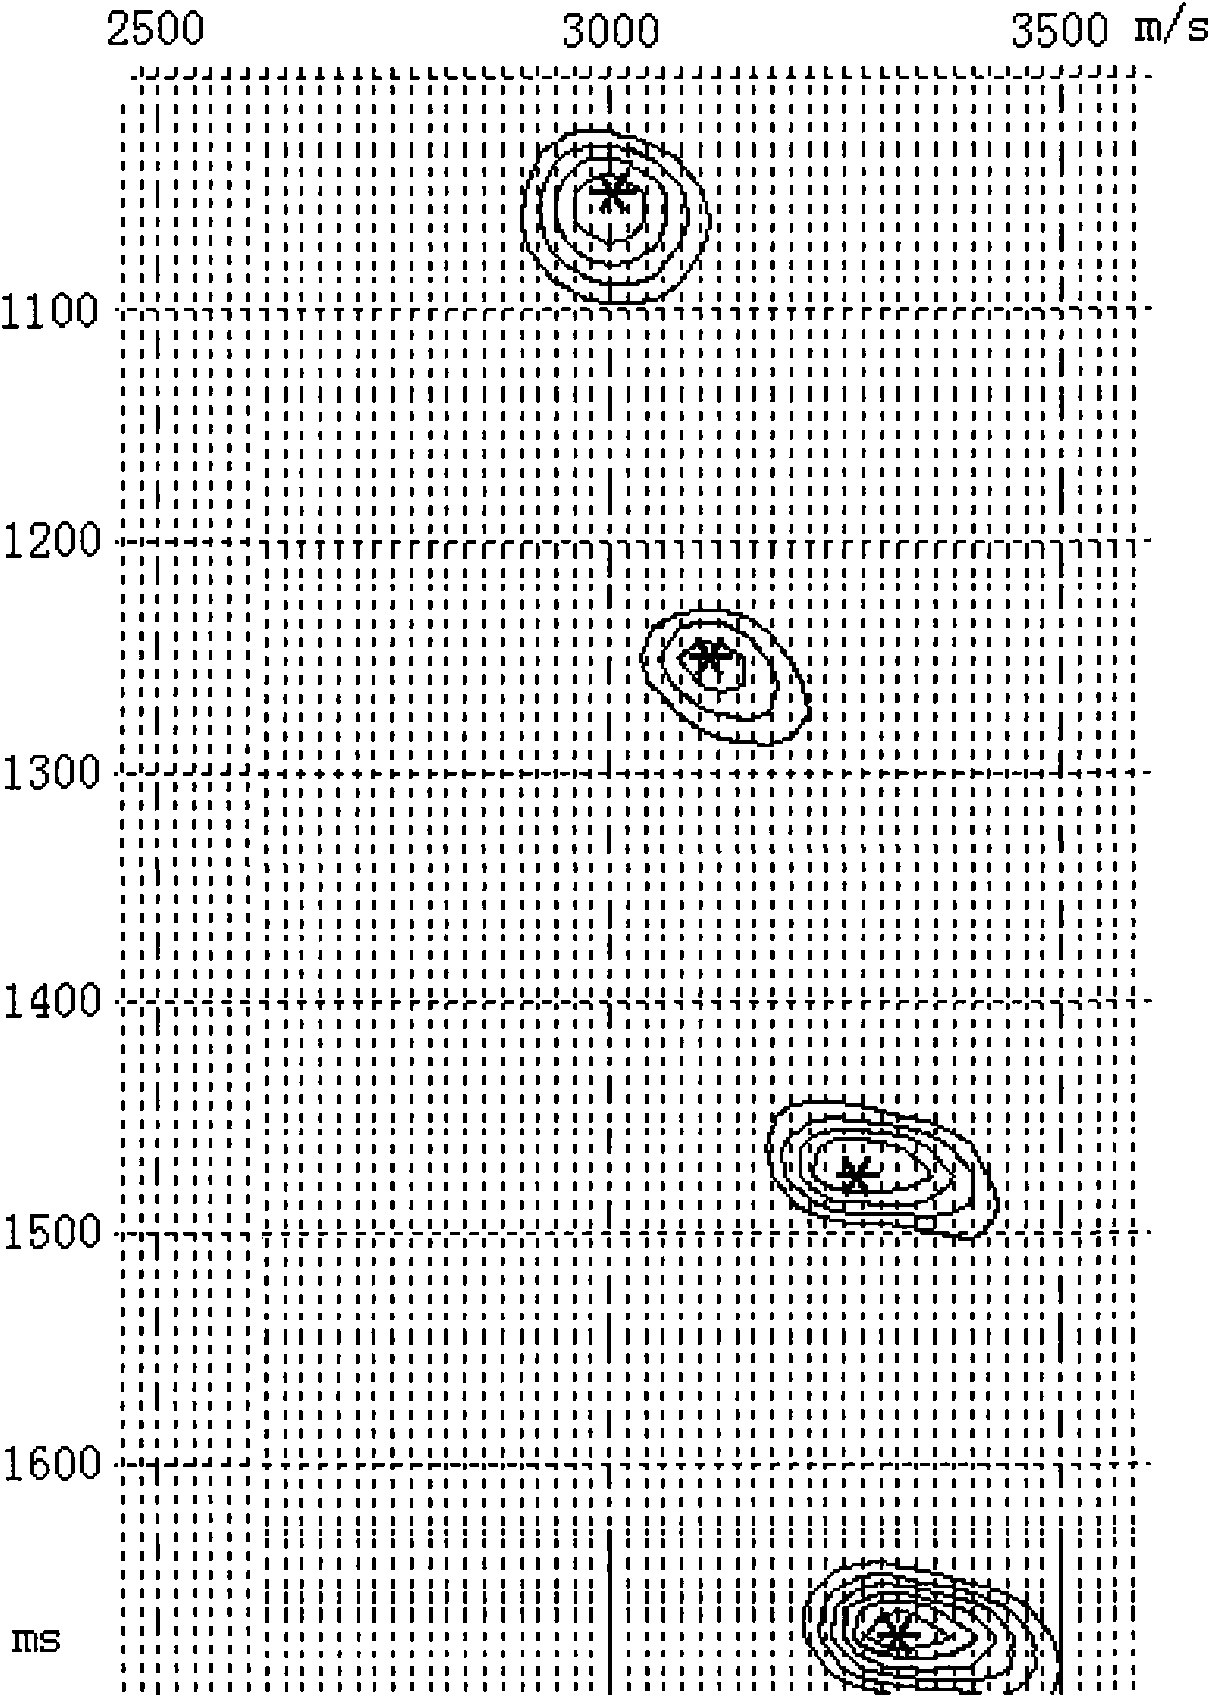 Method for determining optimum velocity section for pre-stack time migration